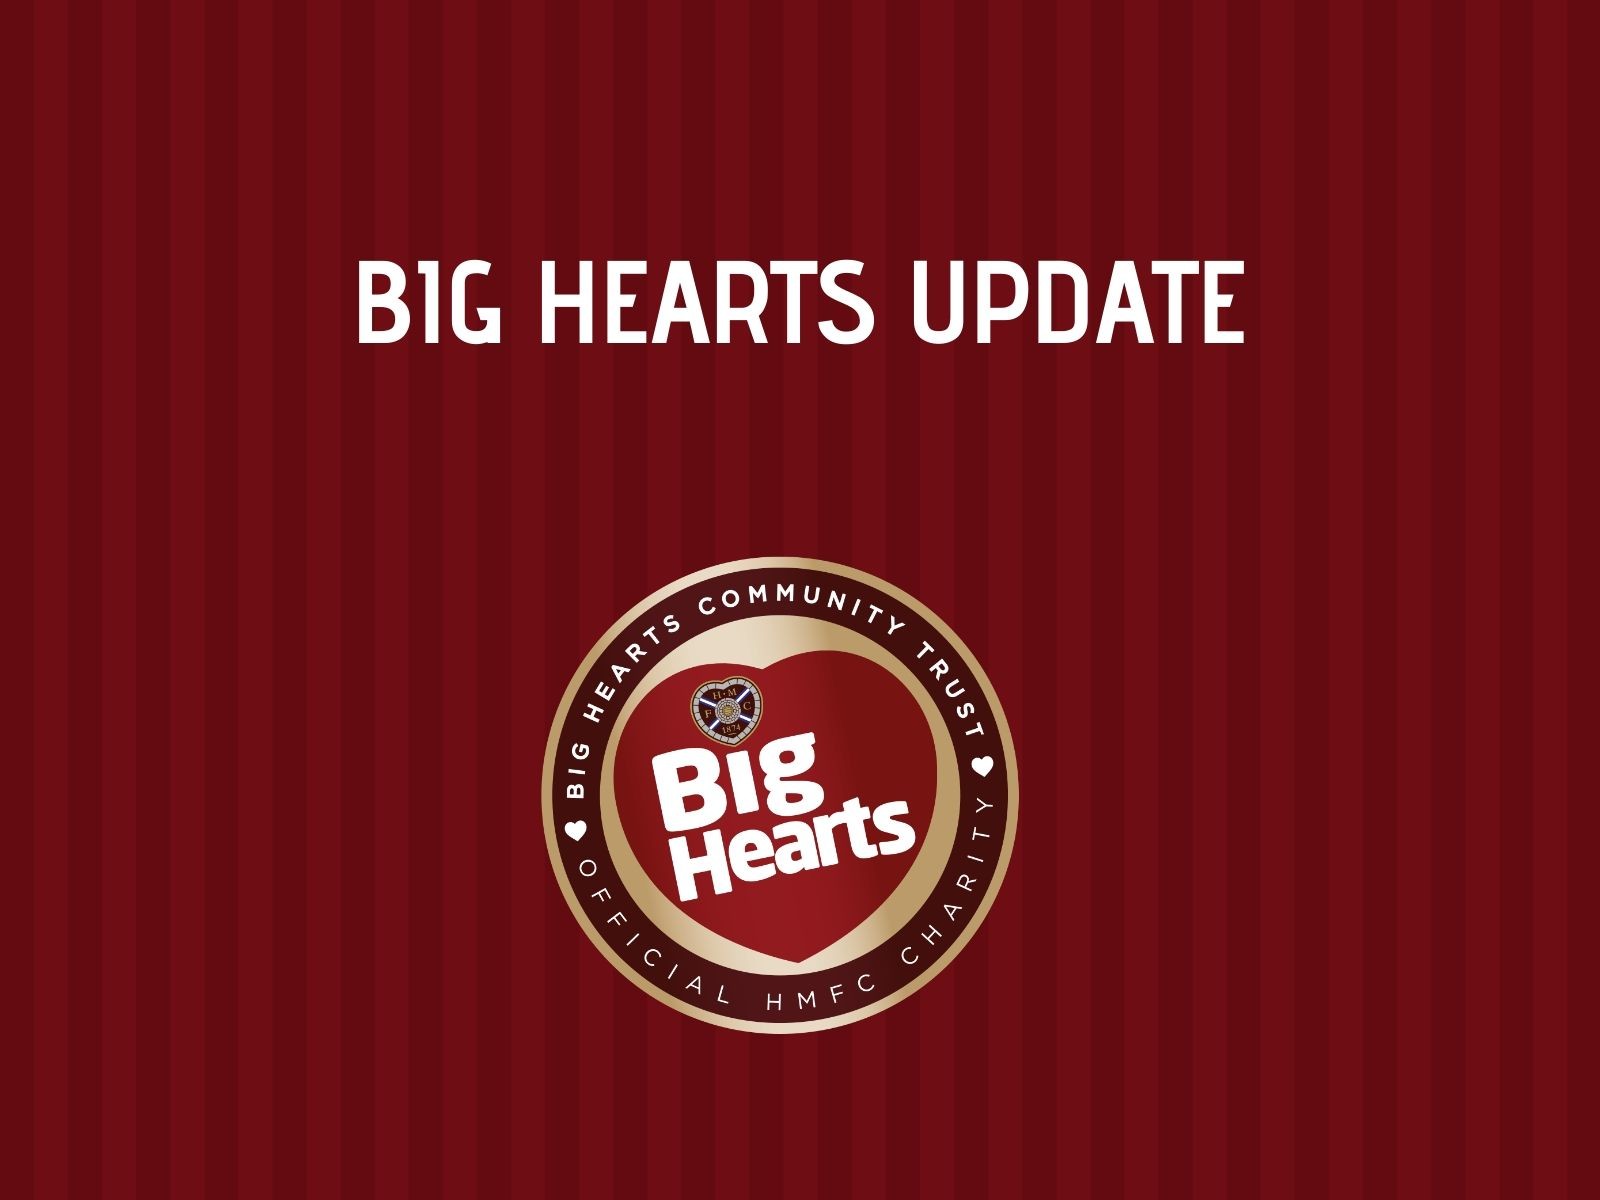  » Update on our activity – Big Hearts